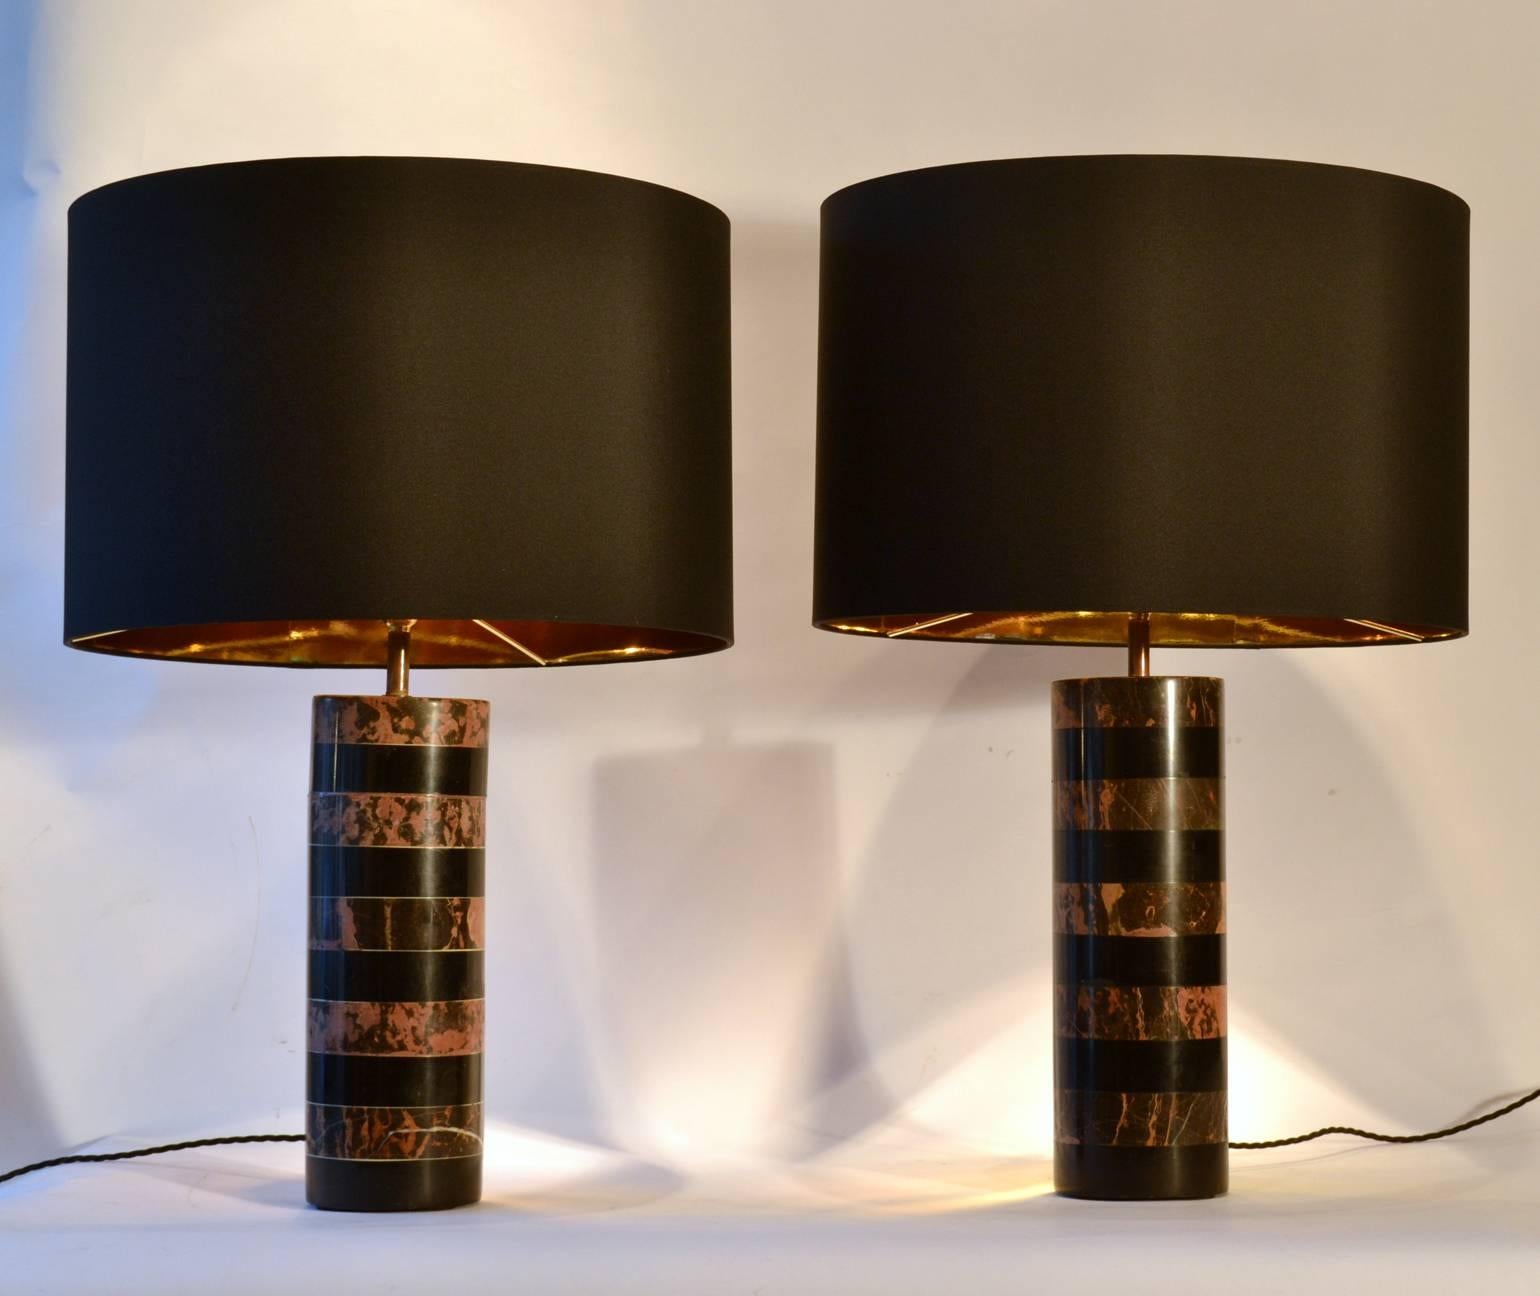 Marble cylinder table lamps with alternating black and pink layers of solid marble make this pair elegant and classic. French, 1970s
The black and gold drum shape shades, D 45cm. are new.